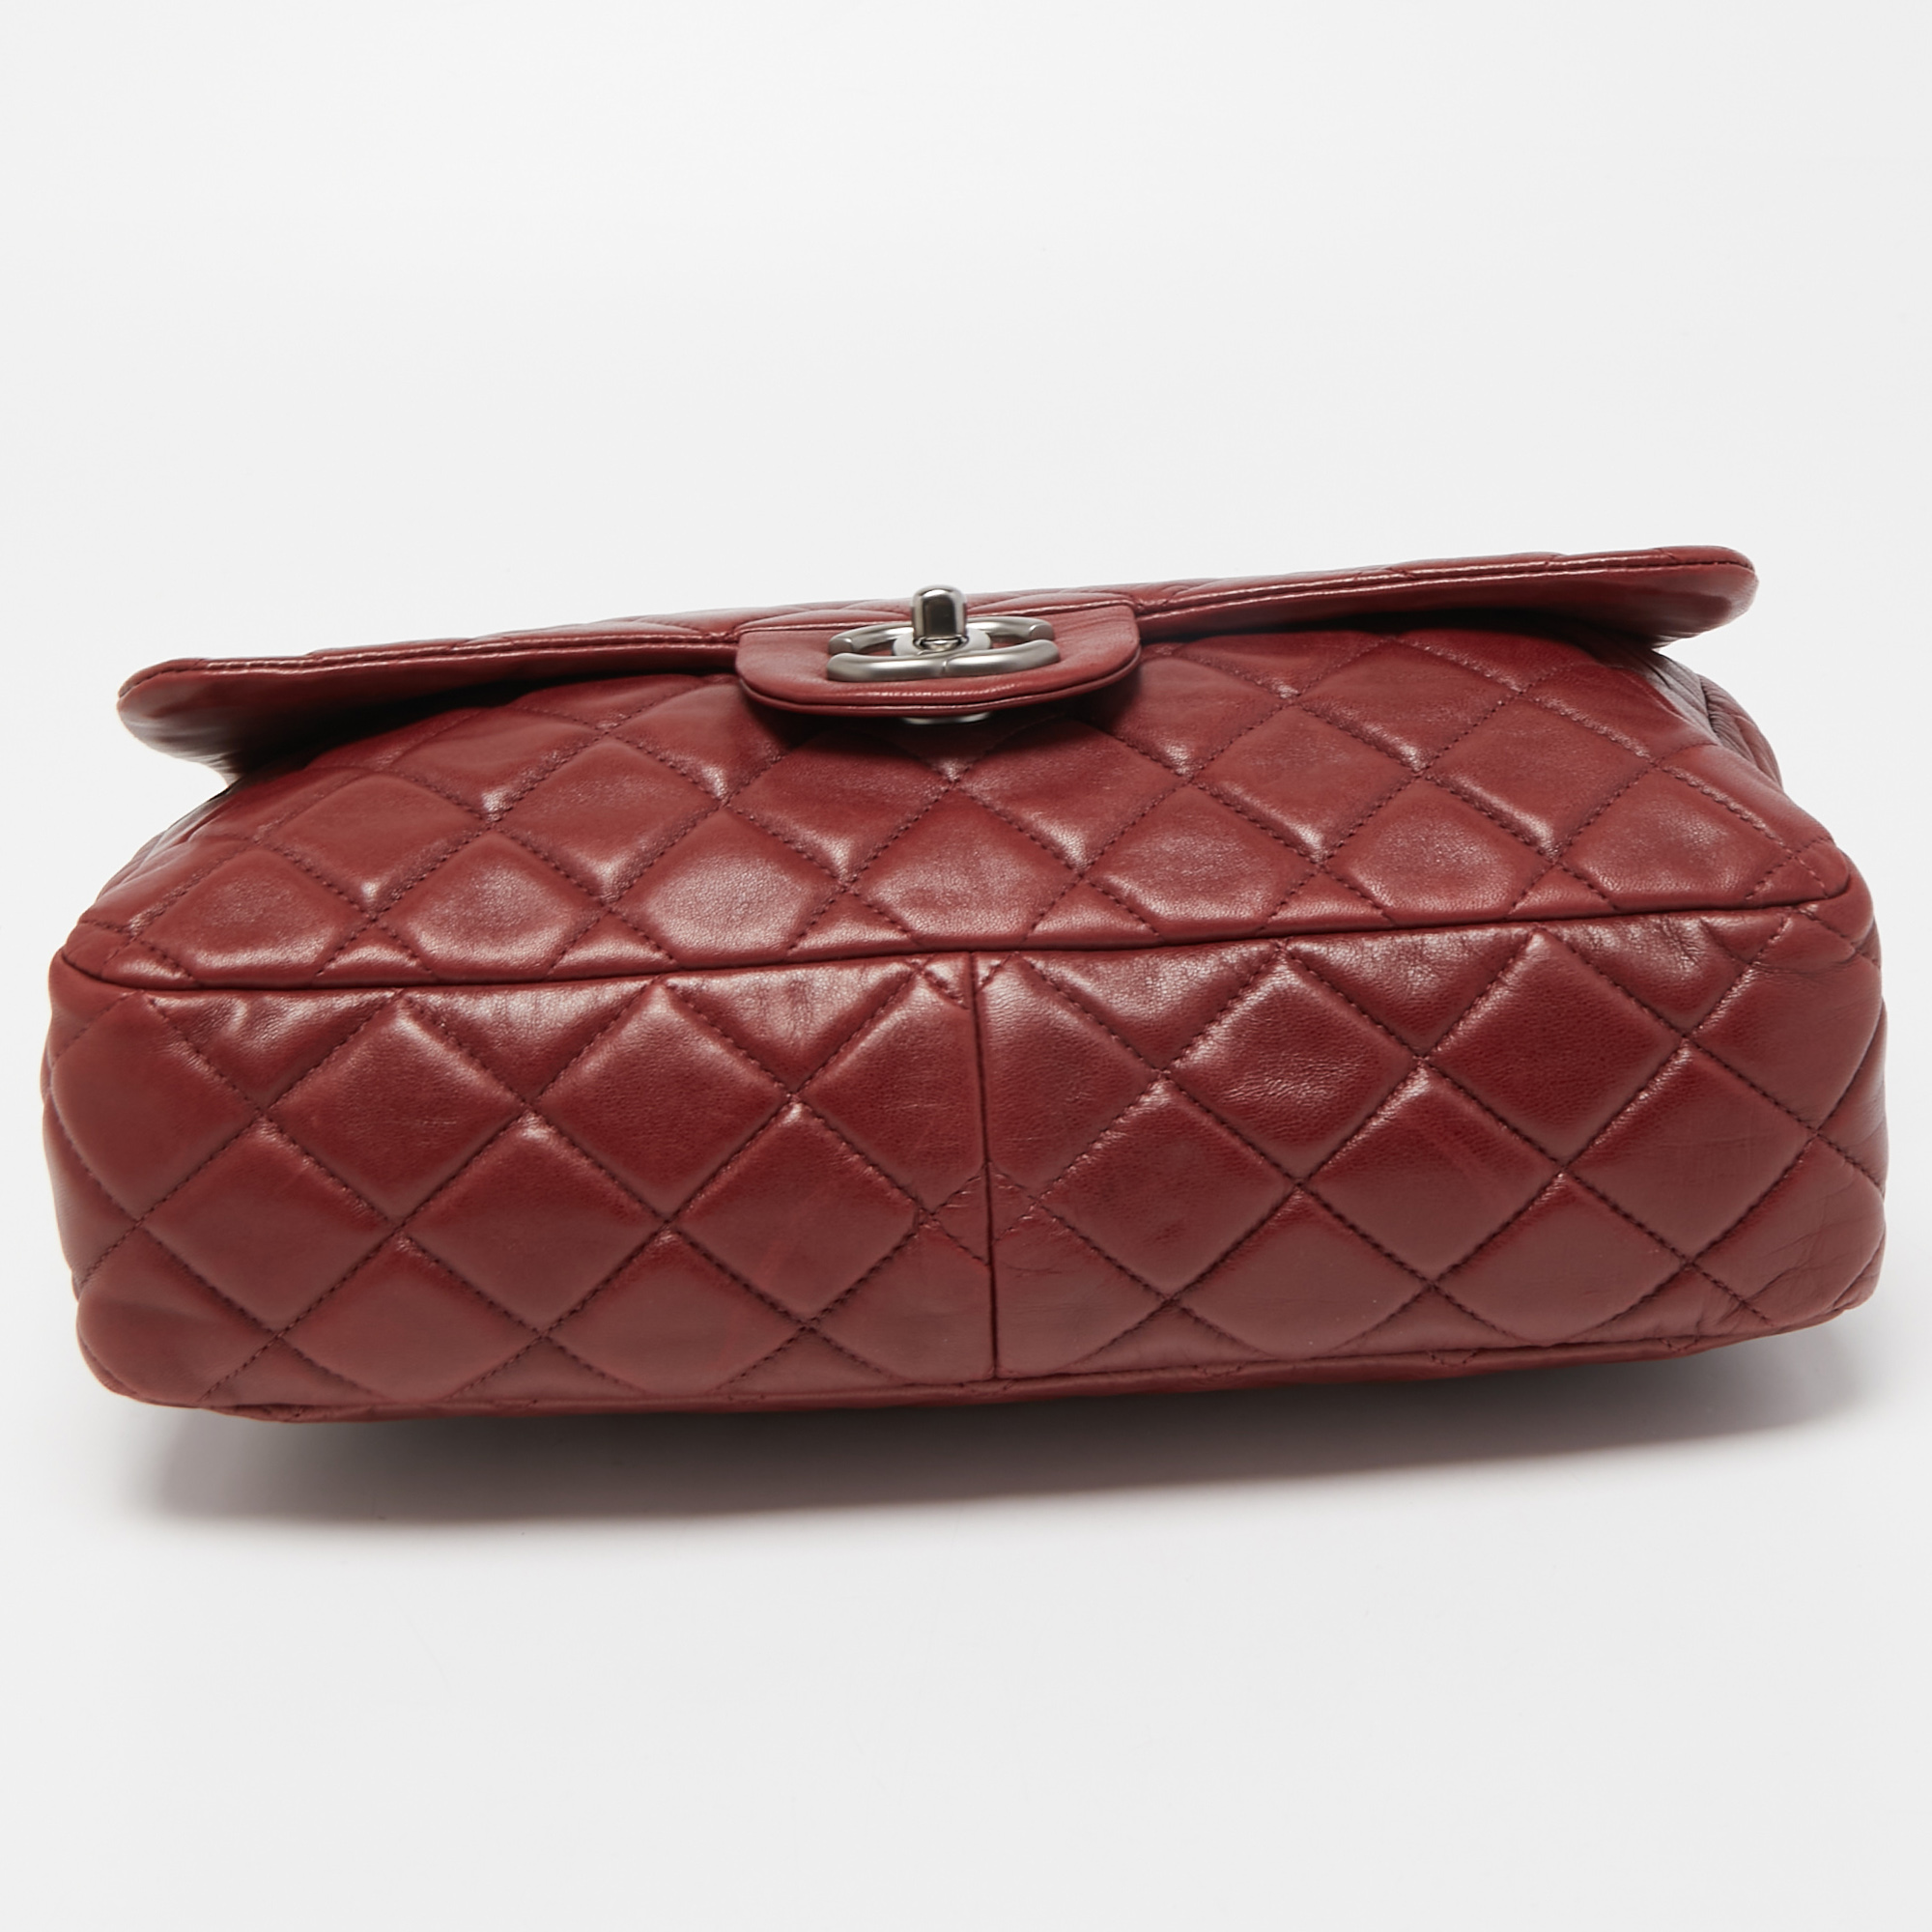 Chanel Red Quilted Leather Jumbo Classic Single Flap Bag